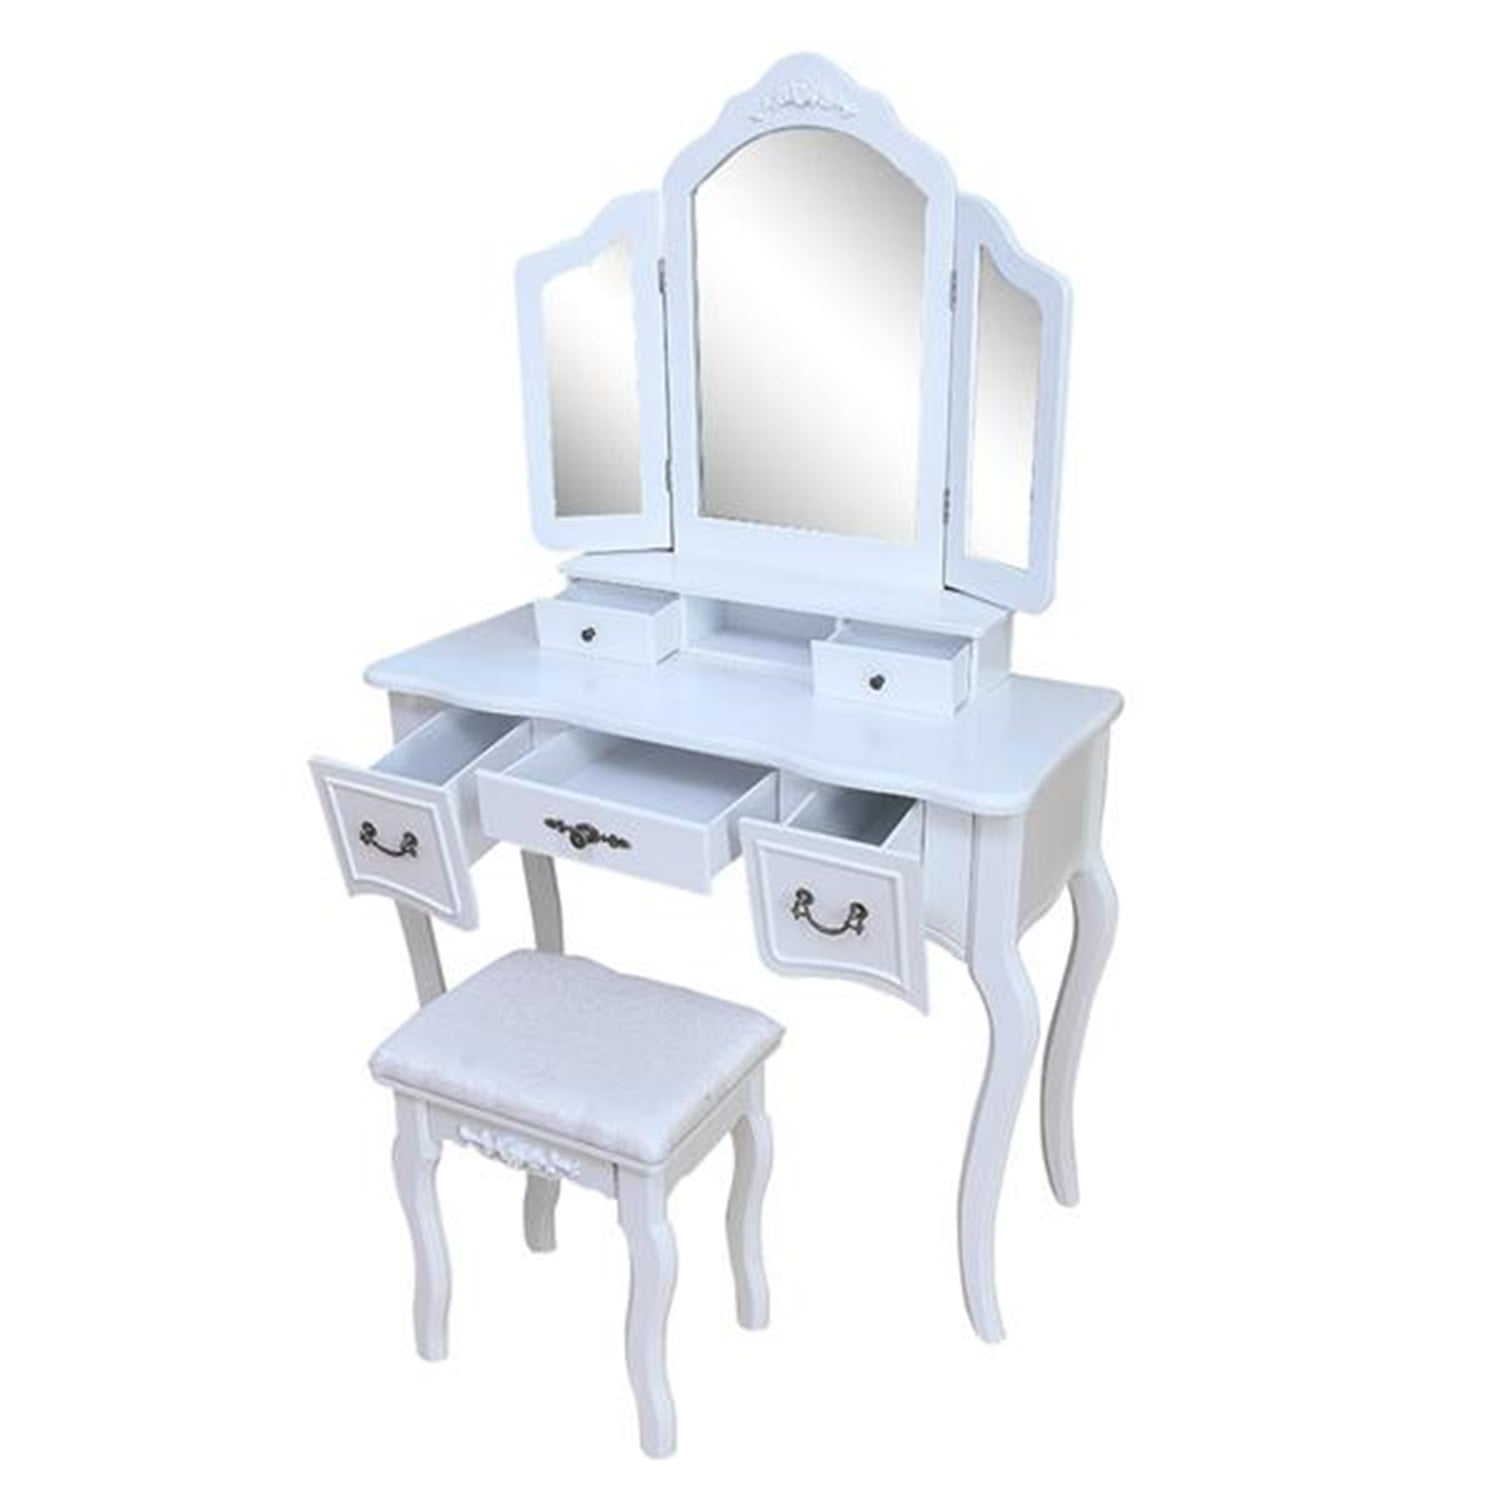 Veryke Makeup Vanity Set Table, Dressing Table With Light Up Mirror And Storage